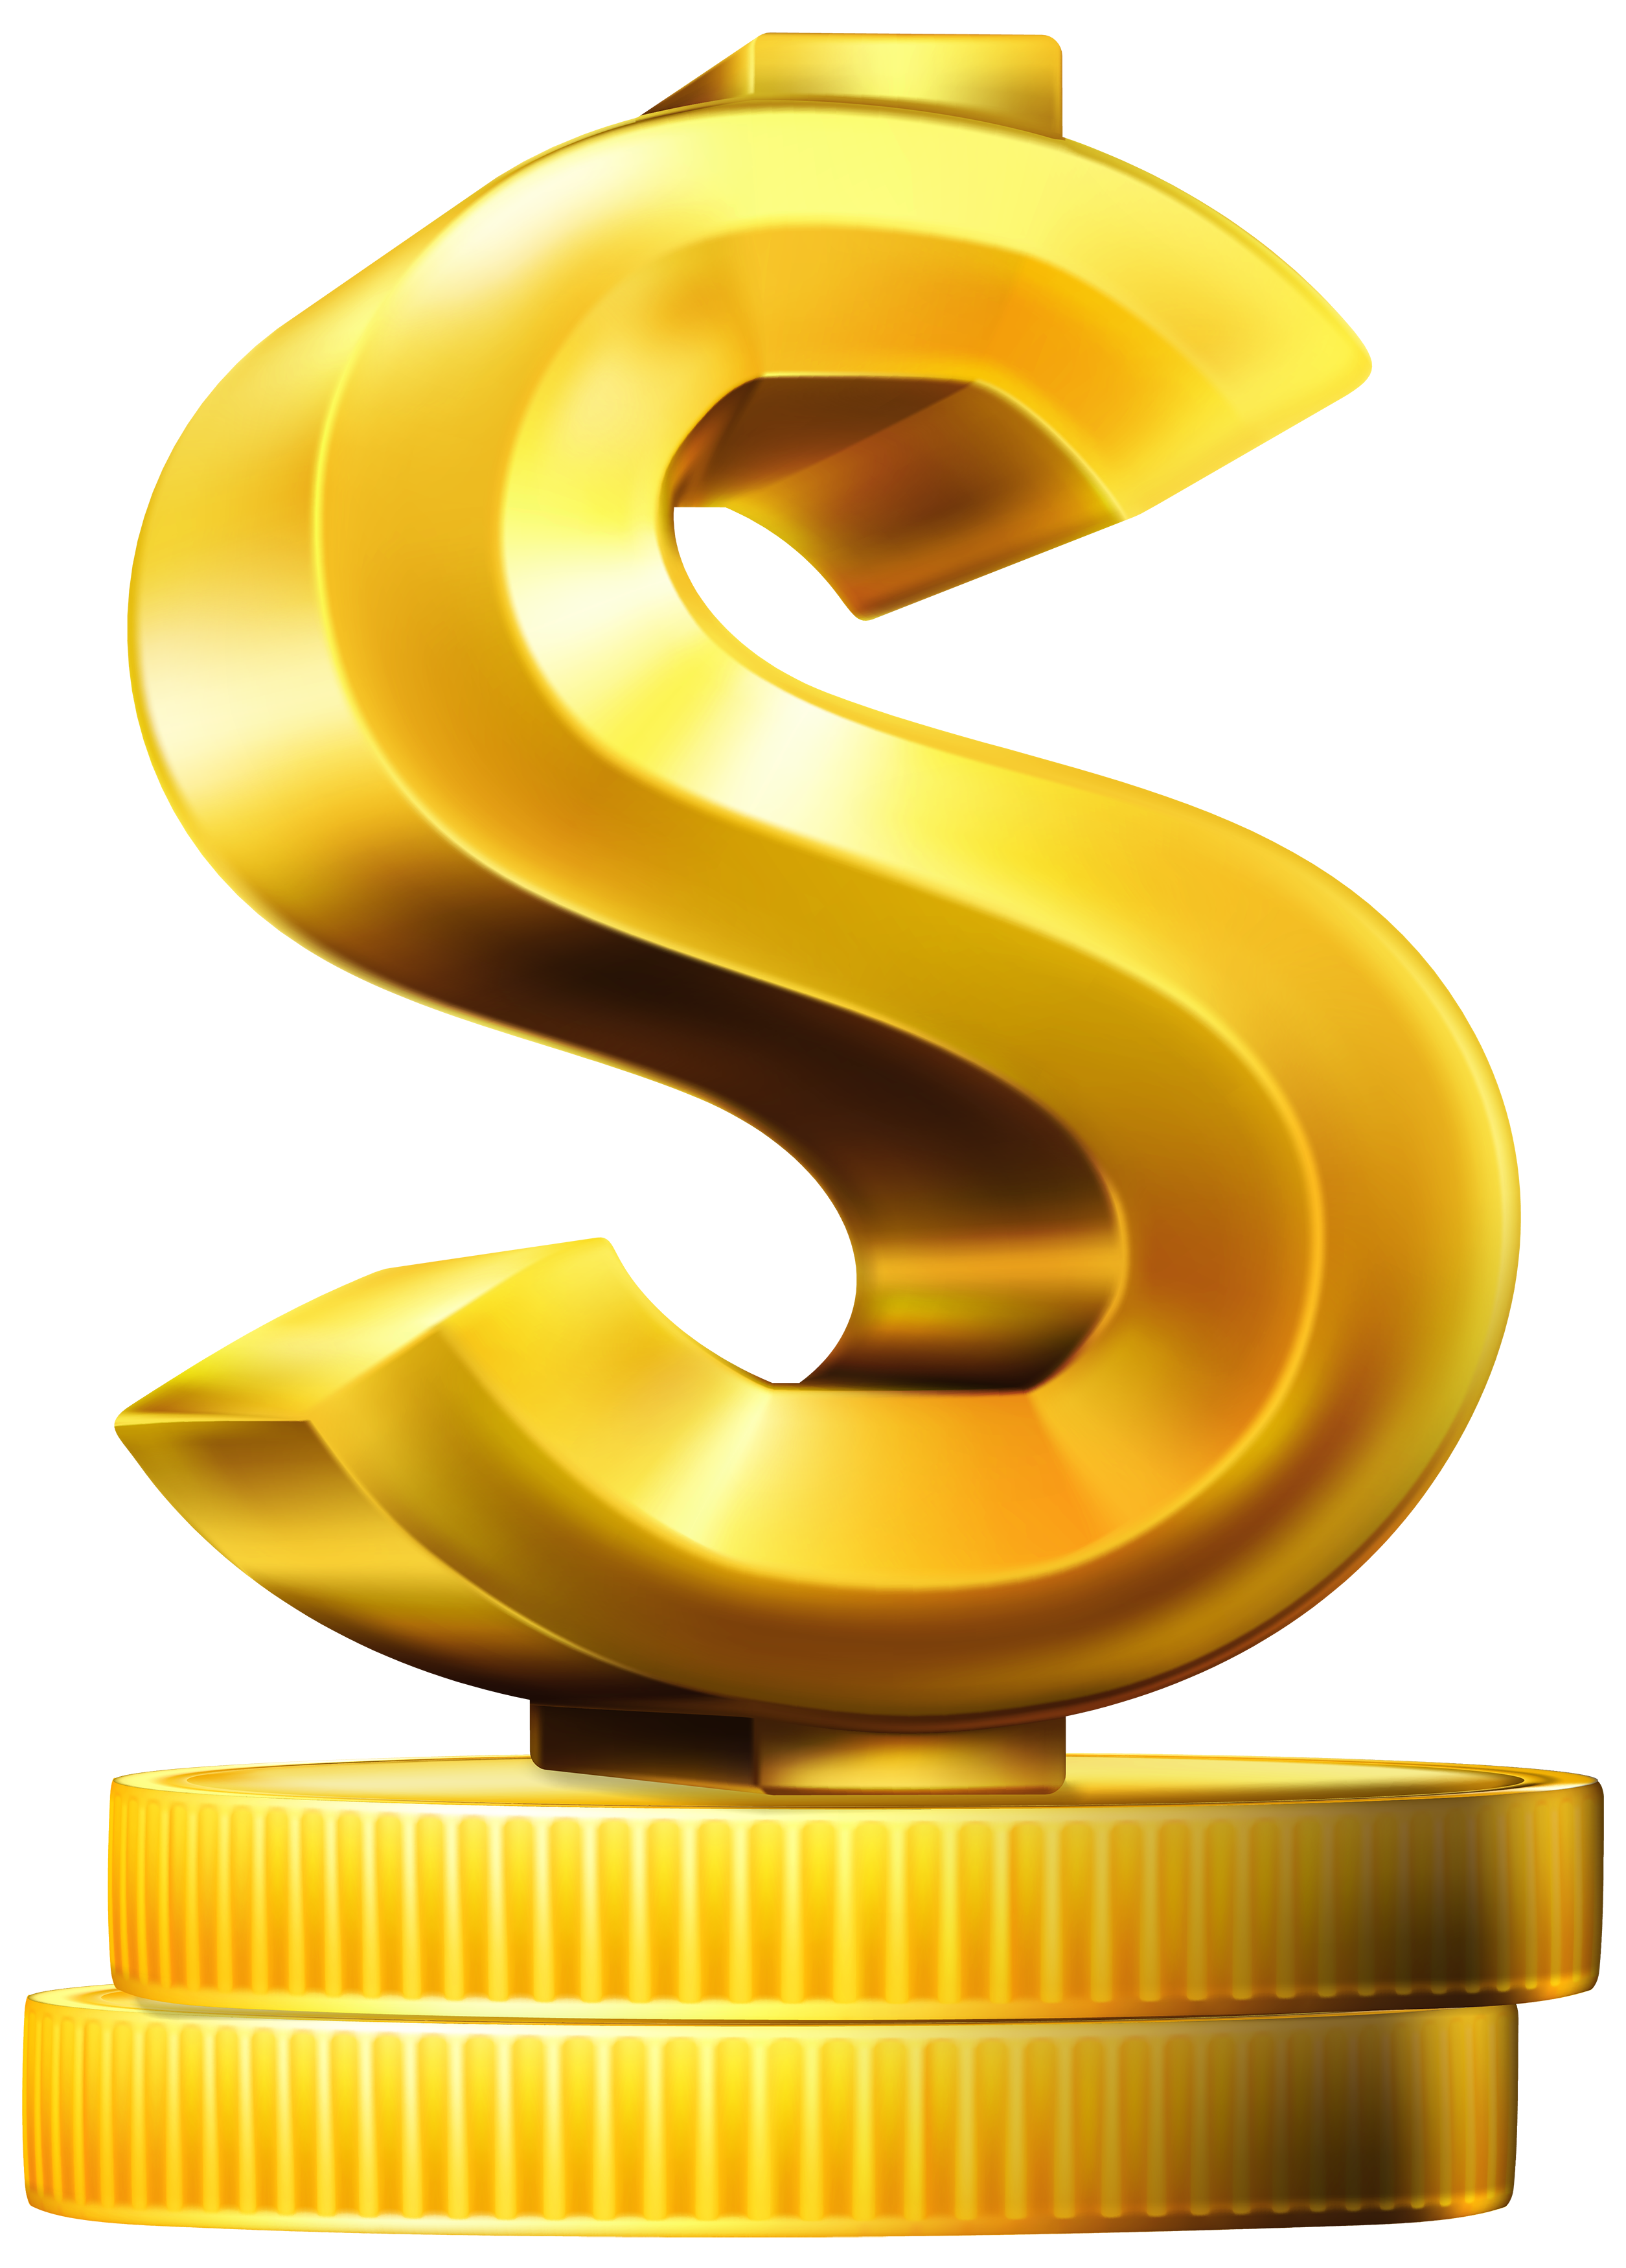 Coins and dollar clipart. Money sign png